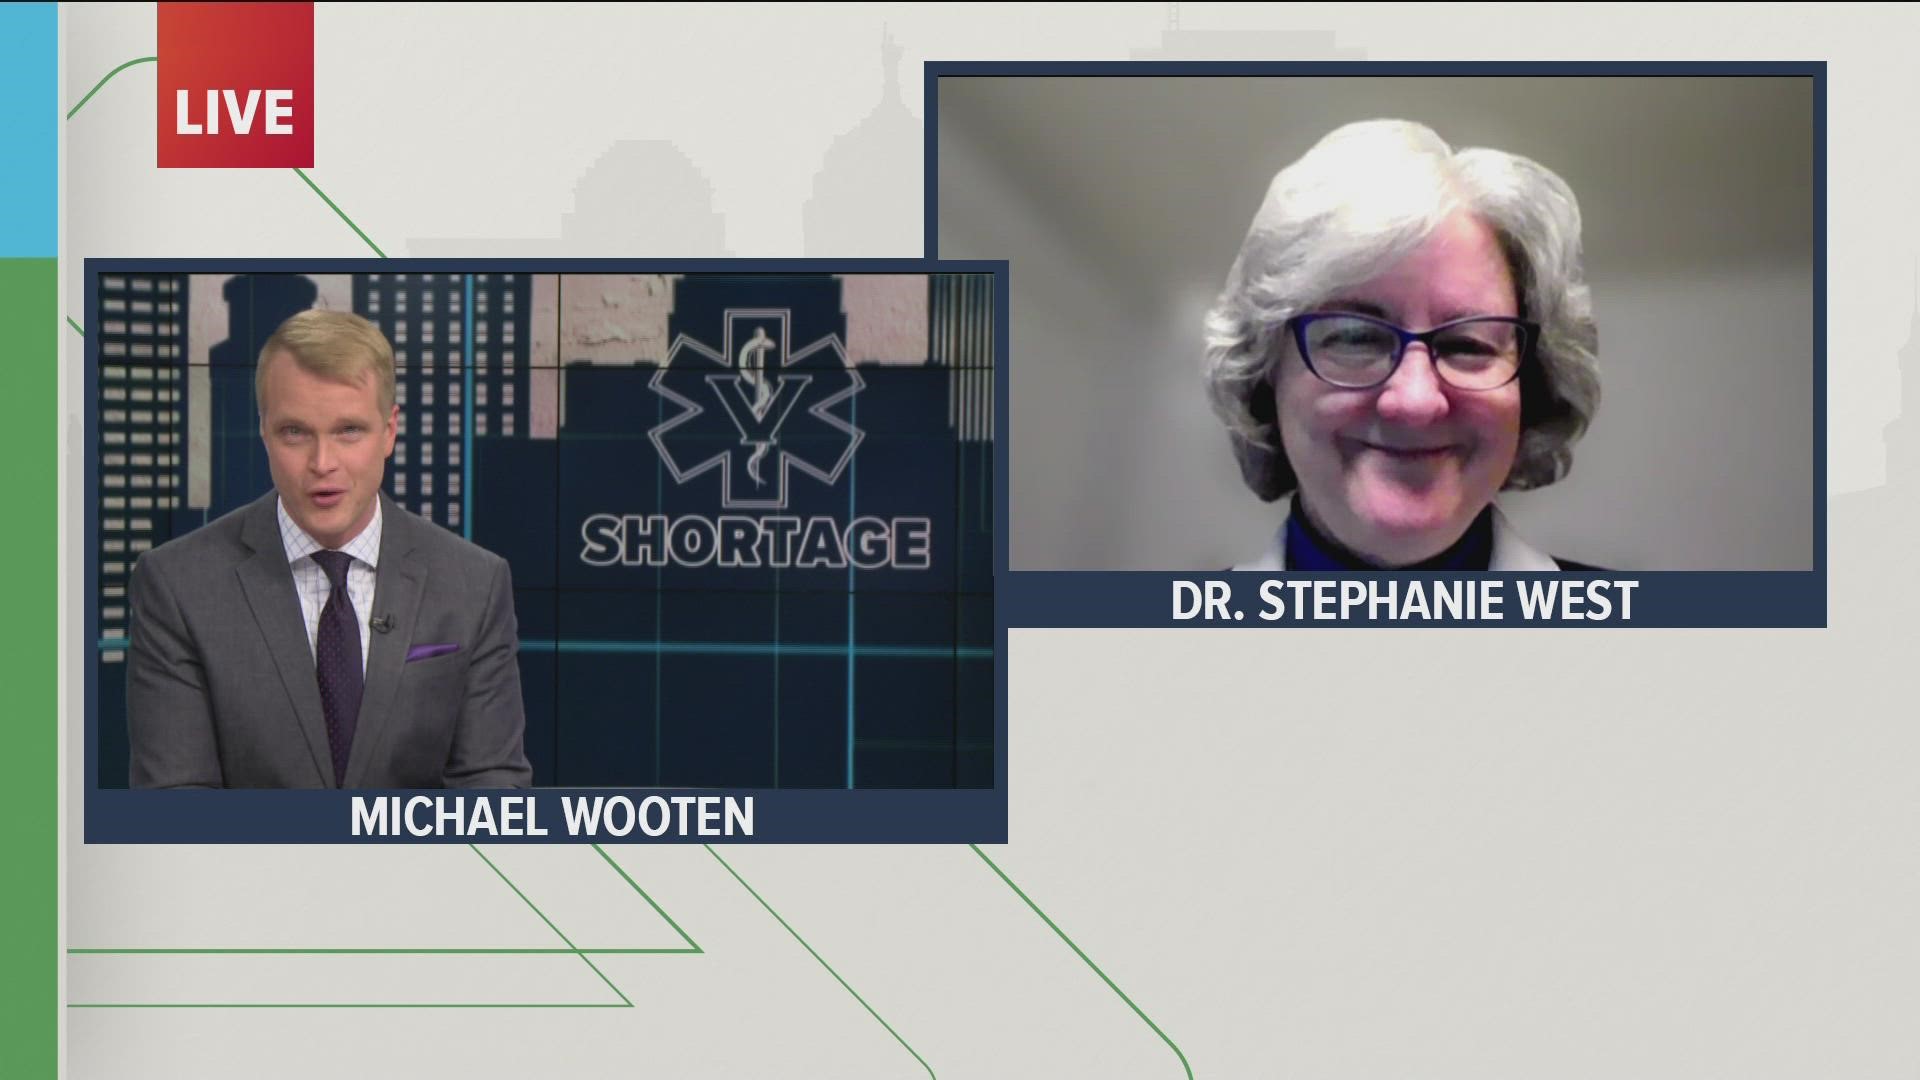 Dr. Stephanie West, executive director of the veterinary emergency clinic she explains why there is a shortage.